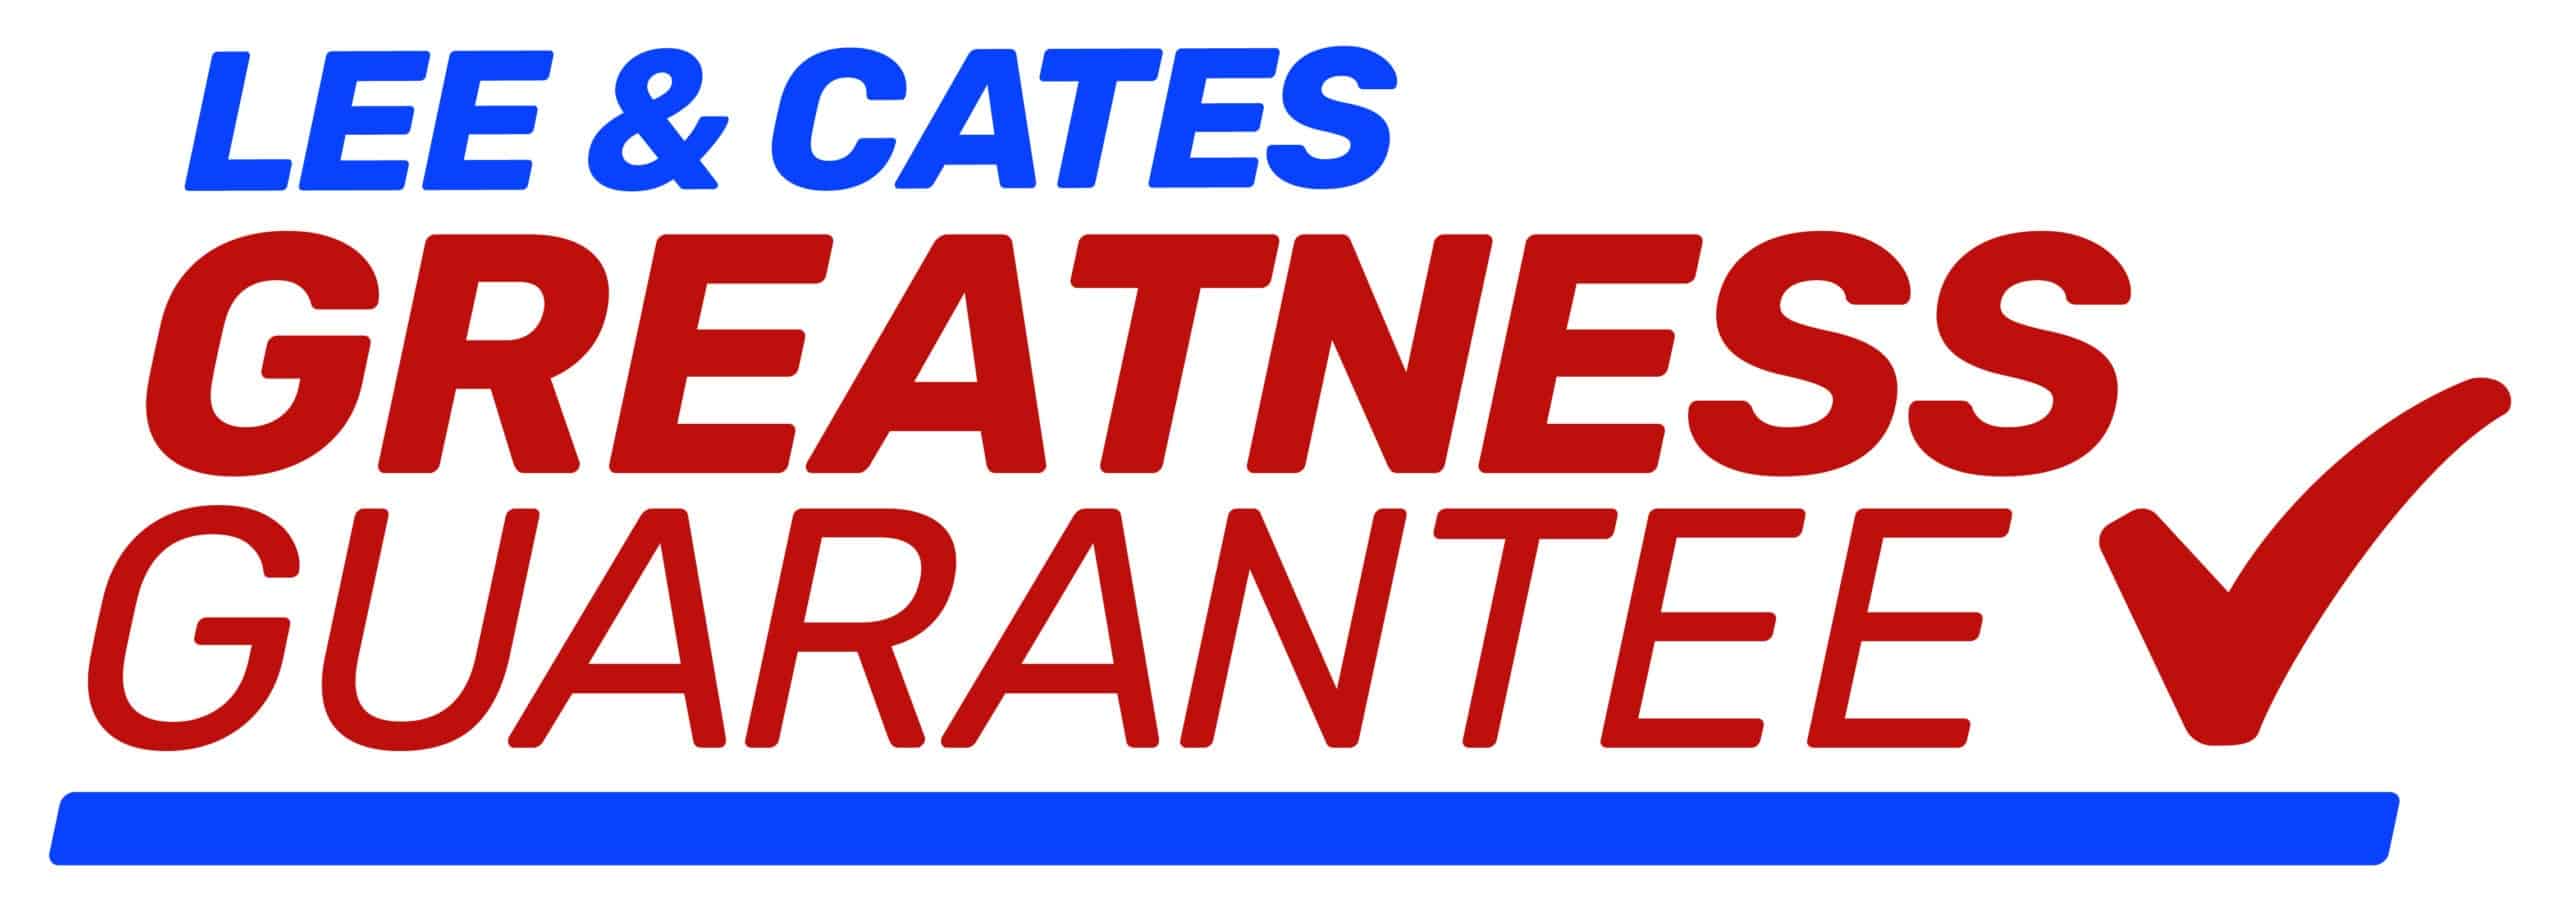 Lee Cates Greatness Logo-01